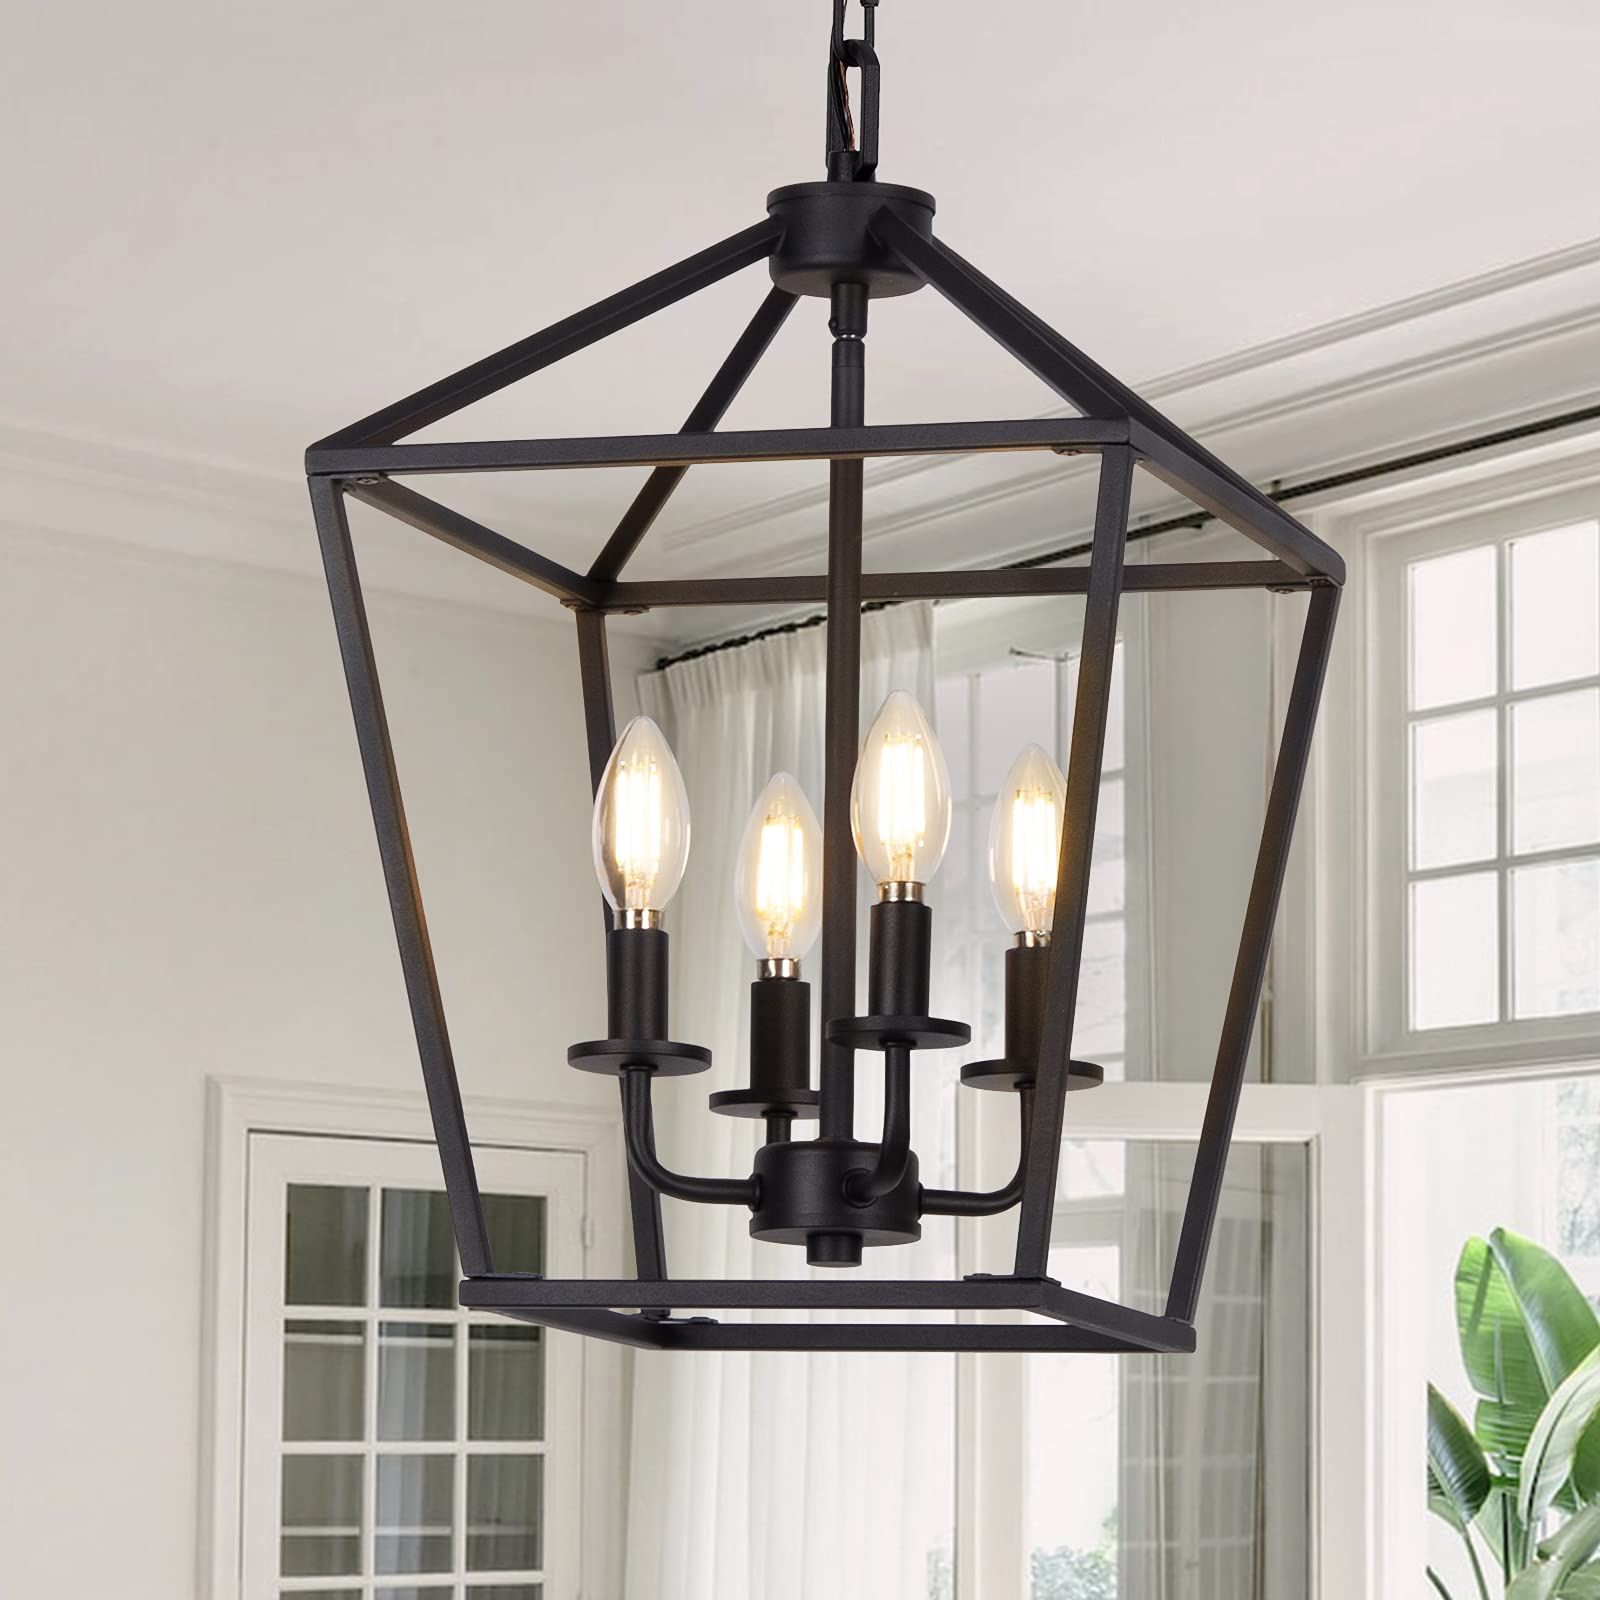 Latest Rustic Black Lantern Chandeliers Inside 4 Light Pendant Lighting, Industrial Ceiling Light Black Lantern Chandelier  With Farmhouse Metal Cage Adjustable Height Rustic Geometric Hanging Light  E12 Base For Kitchen Island, Bedroom Or Entryway – – Amazon (View 1 of 10)